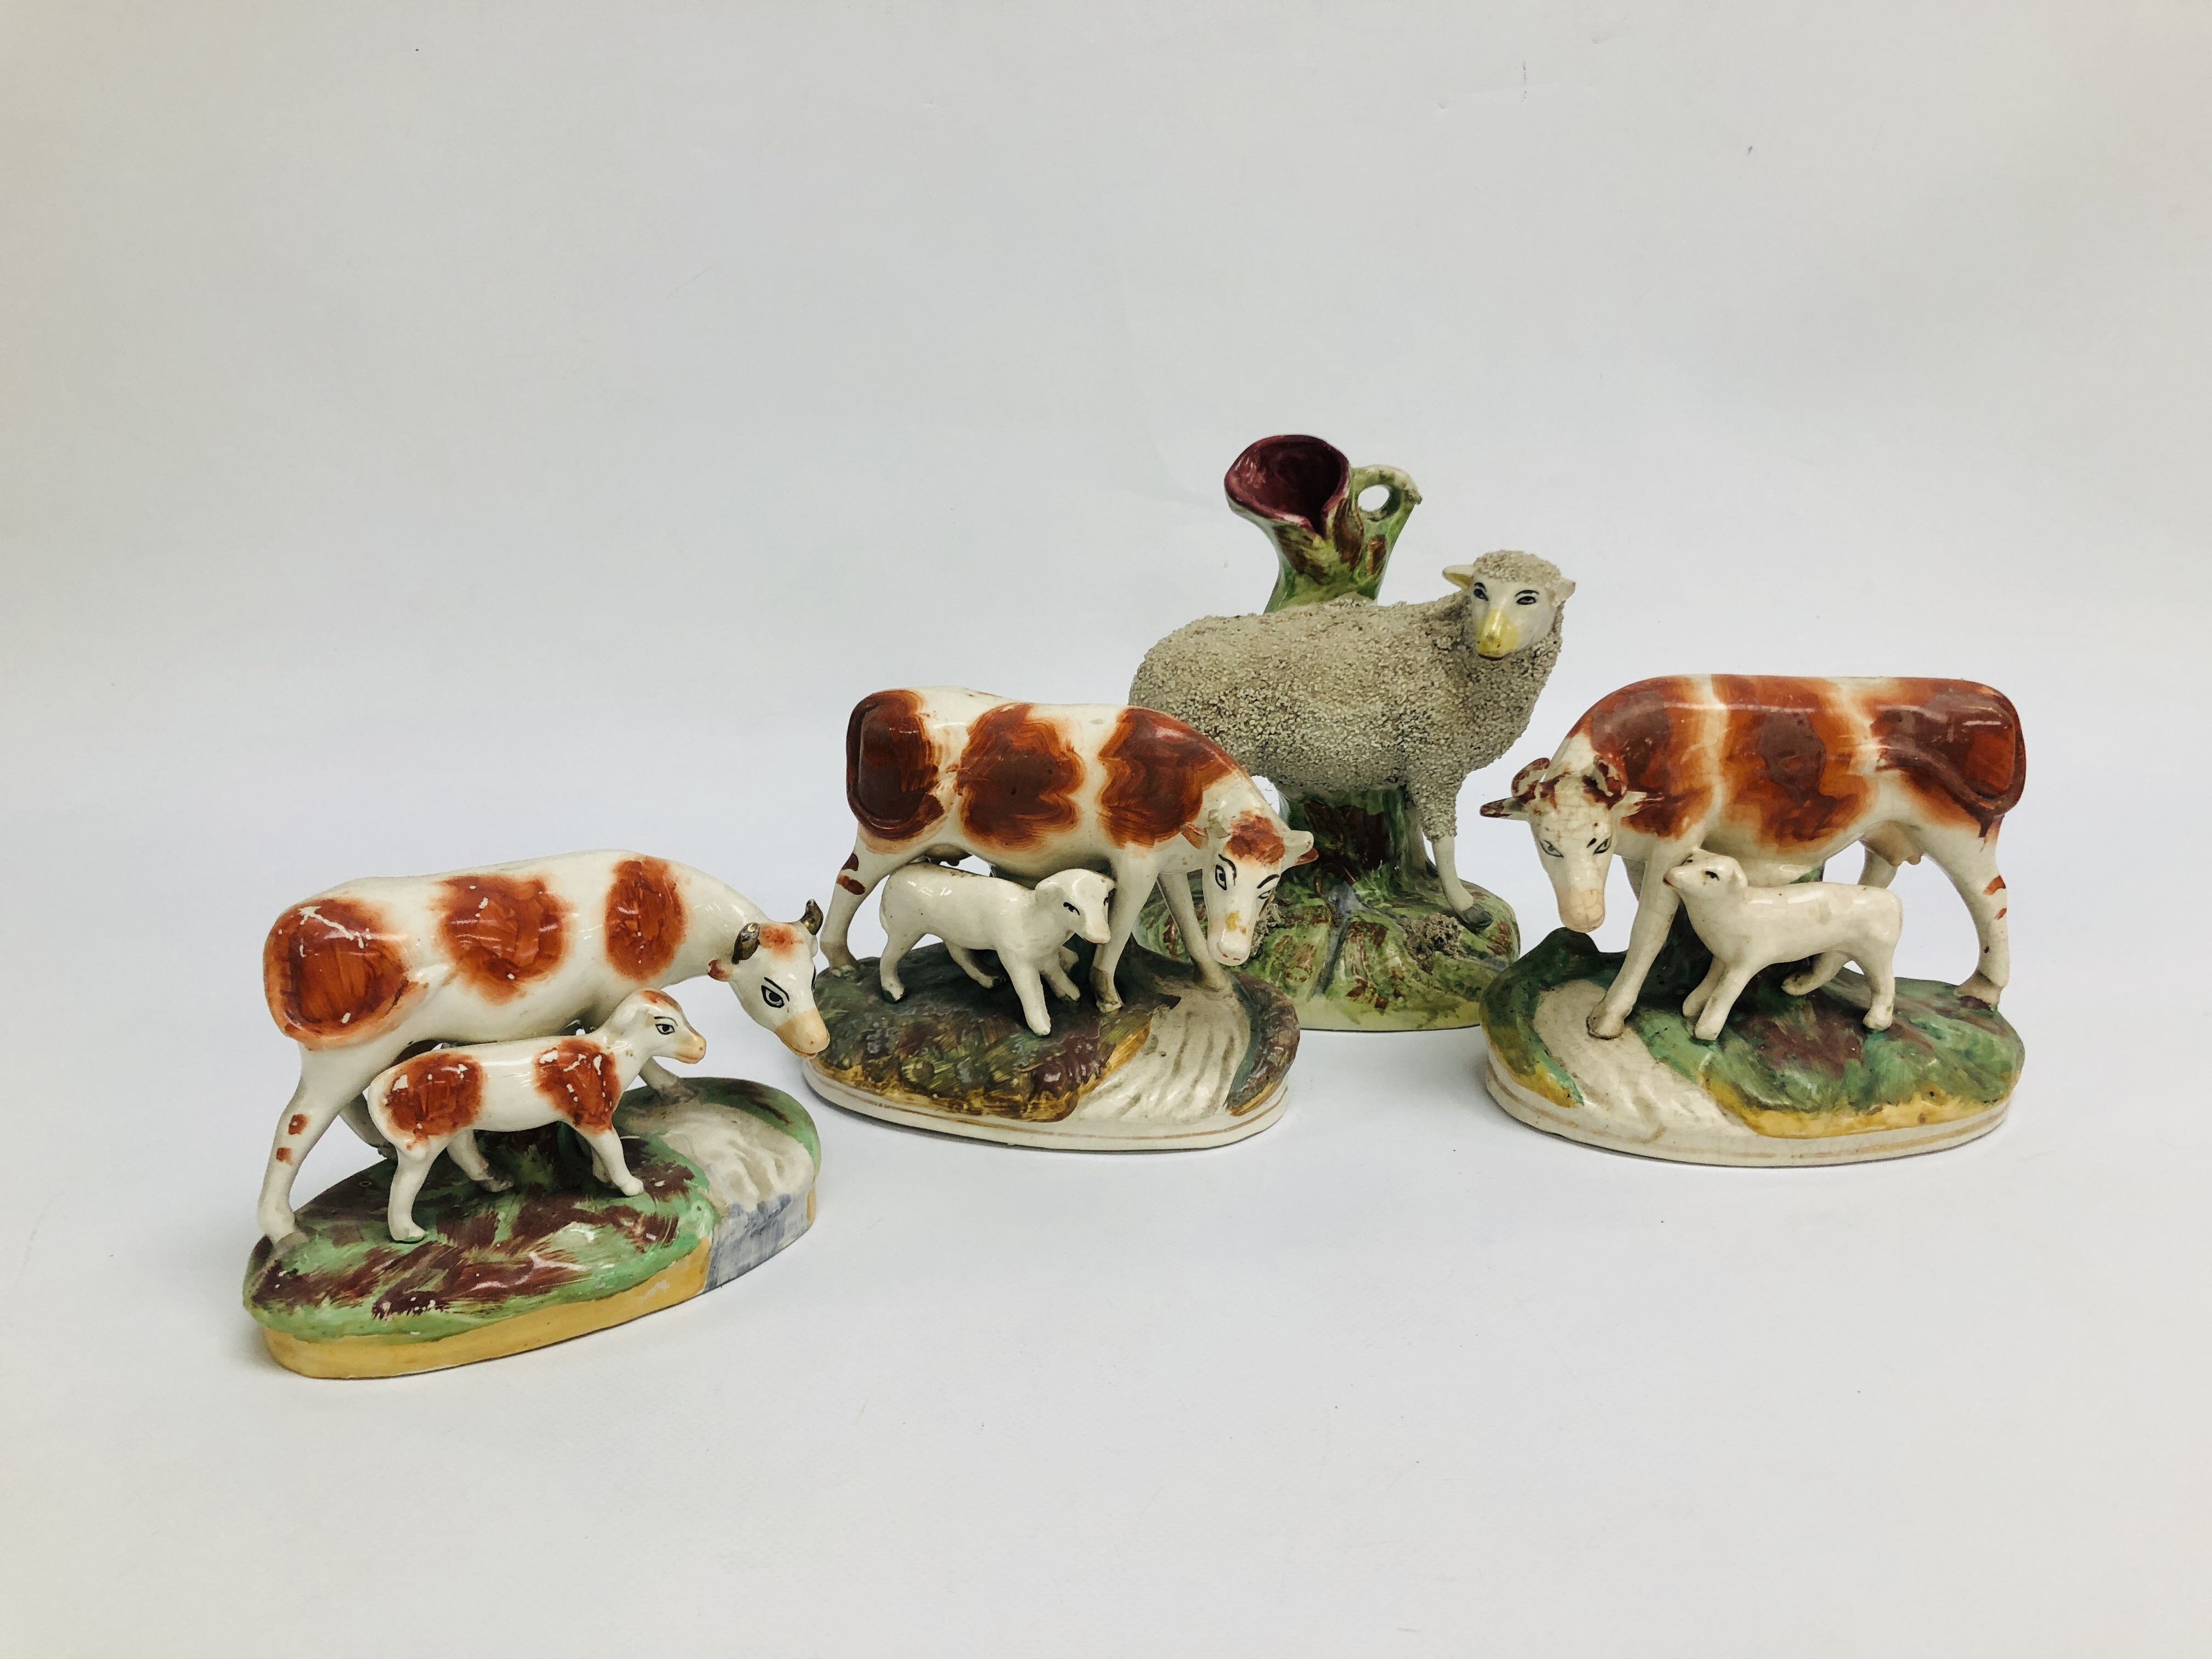 THREE STAFFORDSHIRE MODELS OF COWS AND CALVES, EACH COW HAVING A CALF,